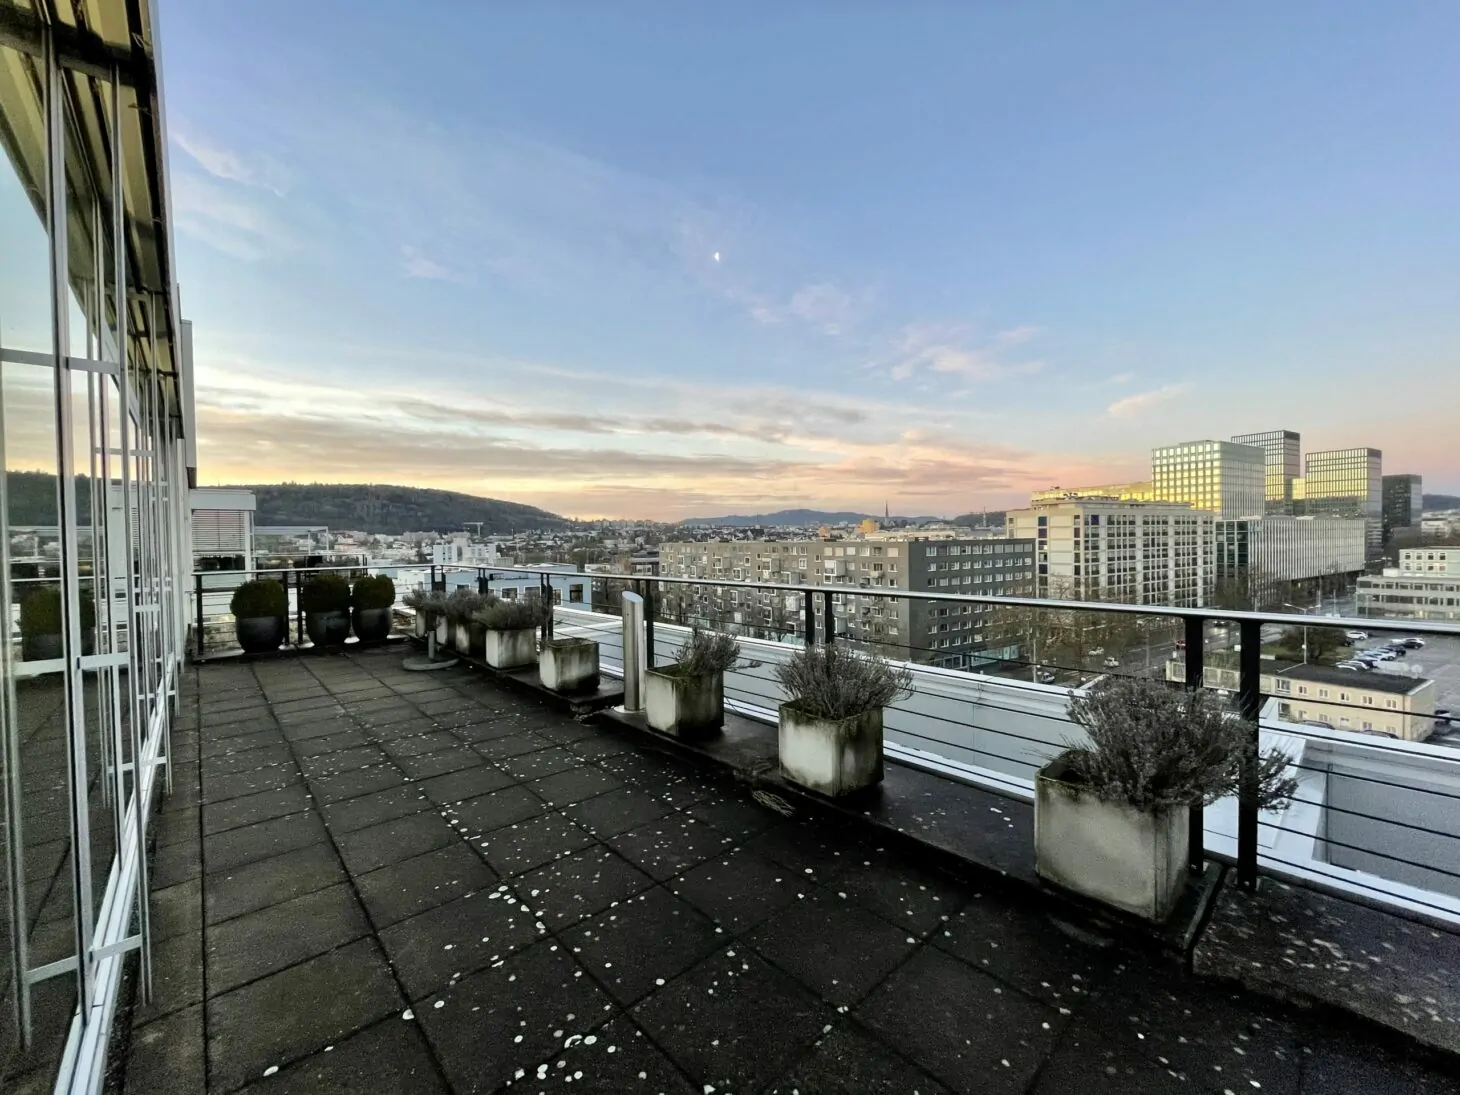 Image of the roof terrace of the valantic branch in Zurich